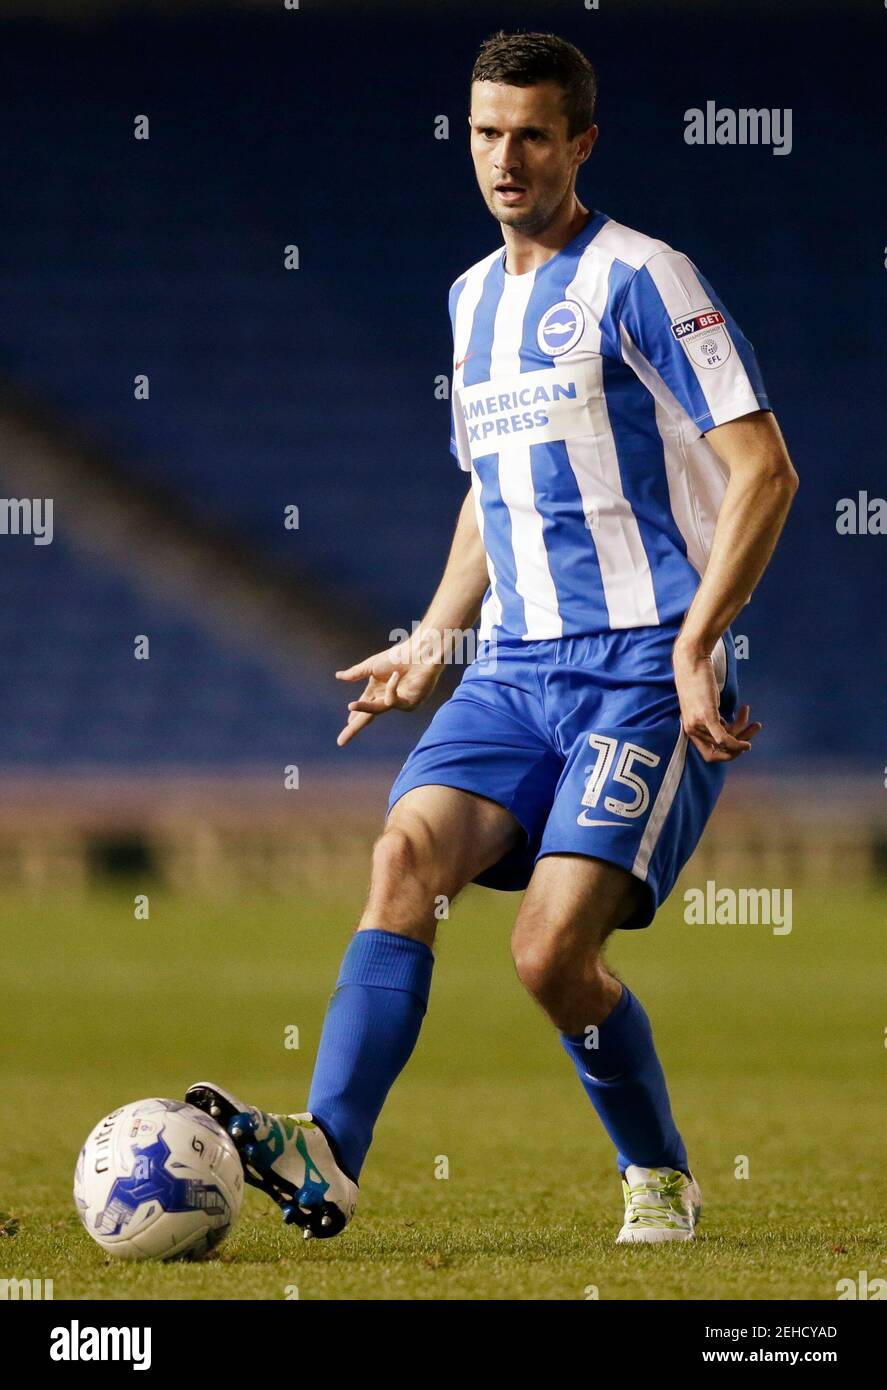 Britain Football Soccer - Brighton & Hove Albion v Colchester United - EFL Cup First Round - The American Express Community Stadium - 16/17 - 9/8/16  Brighton's Jamie Murphy  Mandatory Credit: Action Images / Henry Browne Stock Photo